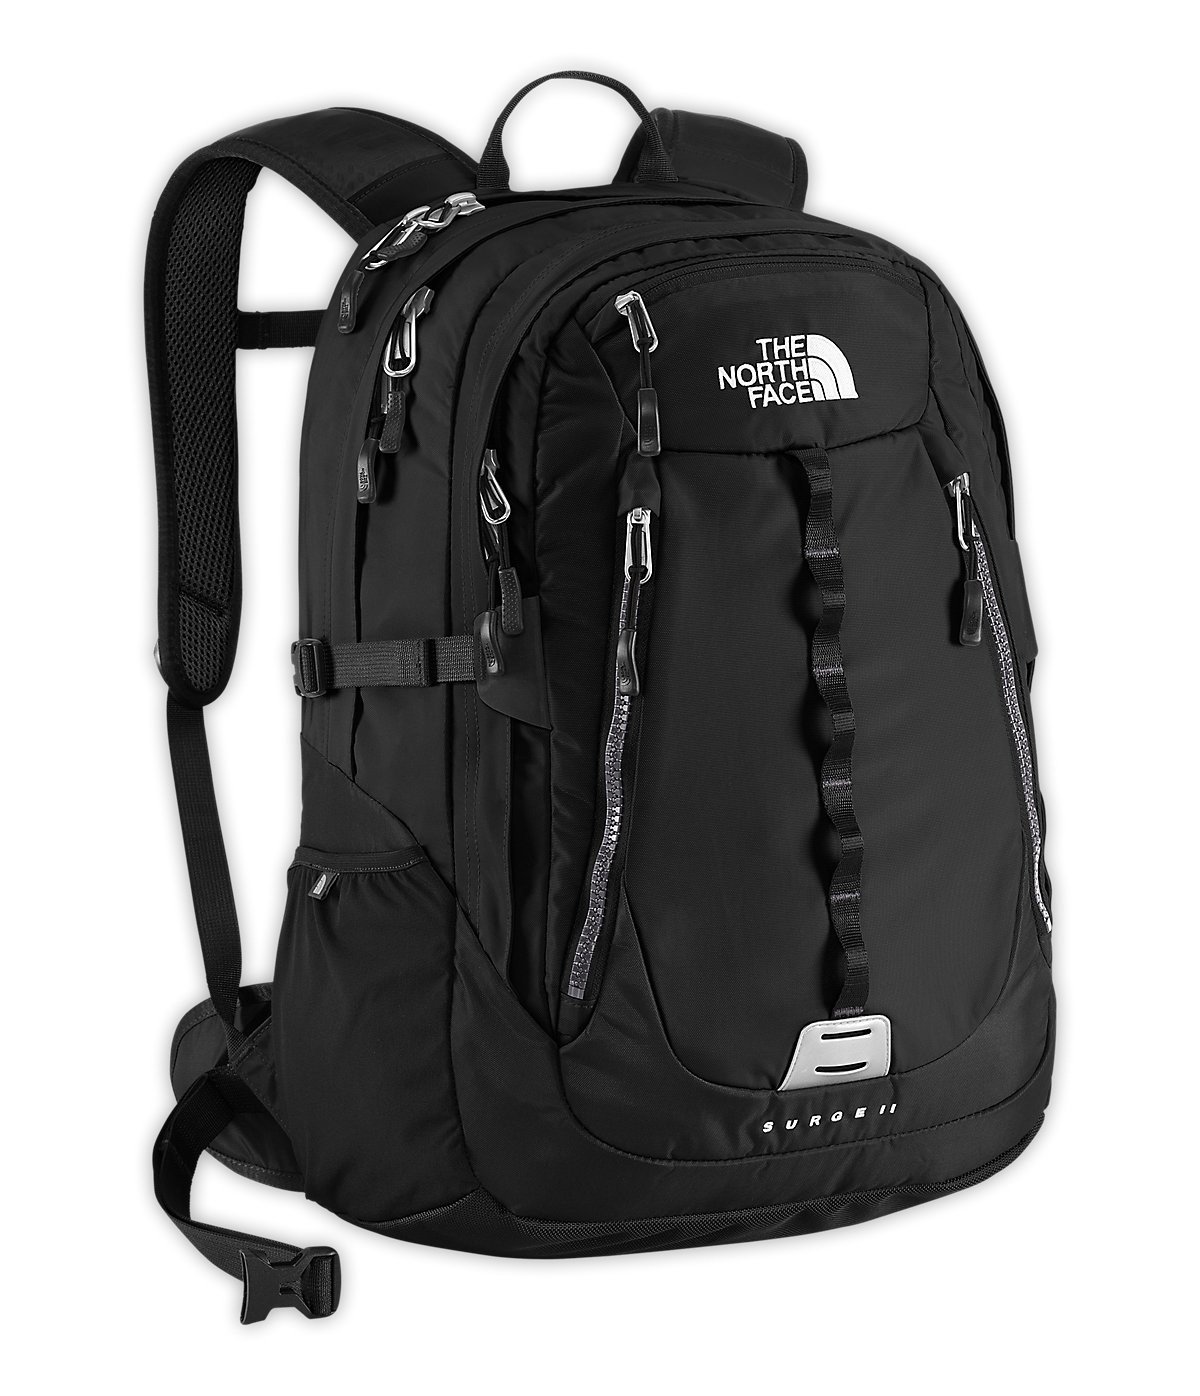 The North Face Surge II Backpack The North Face ktmart.vn 0